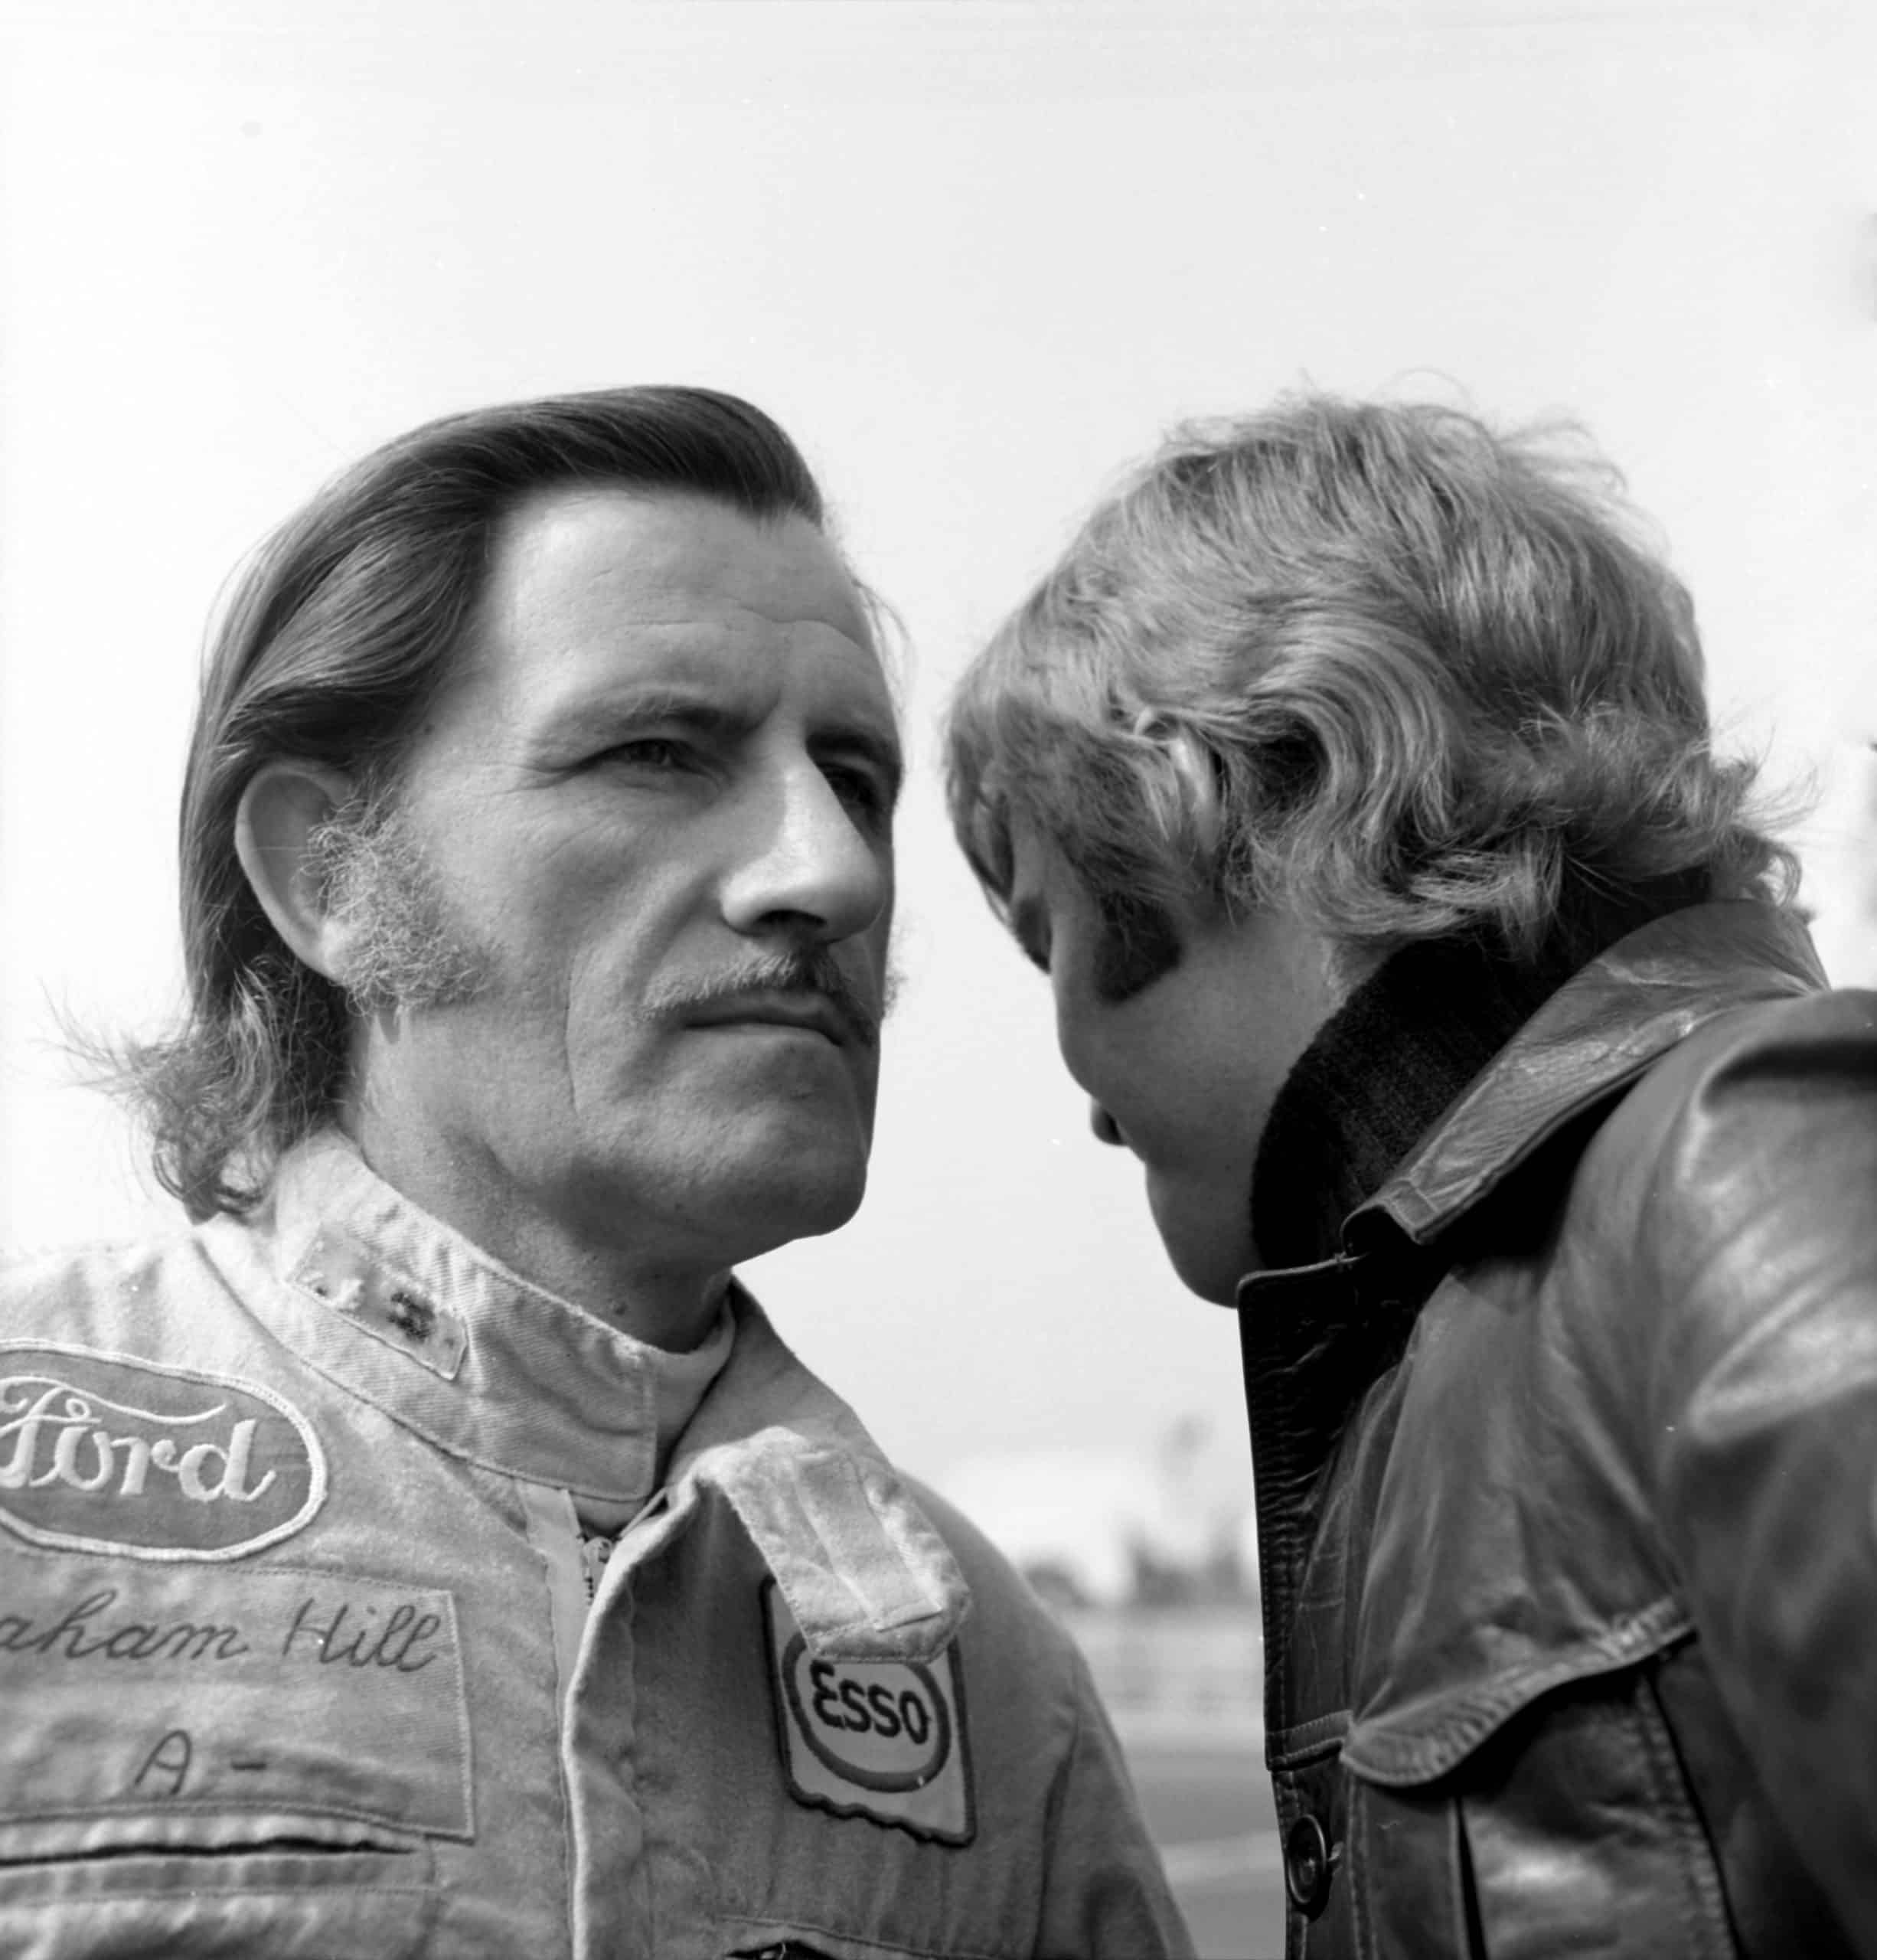 Graham Hill and Max Mosley